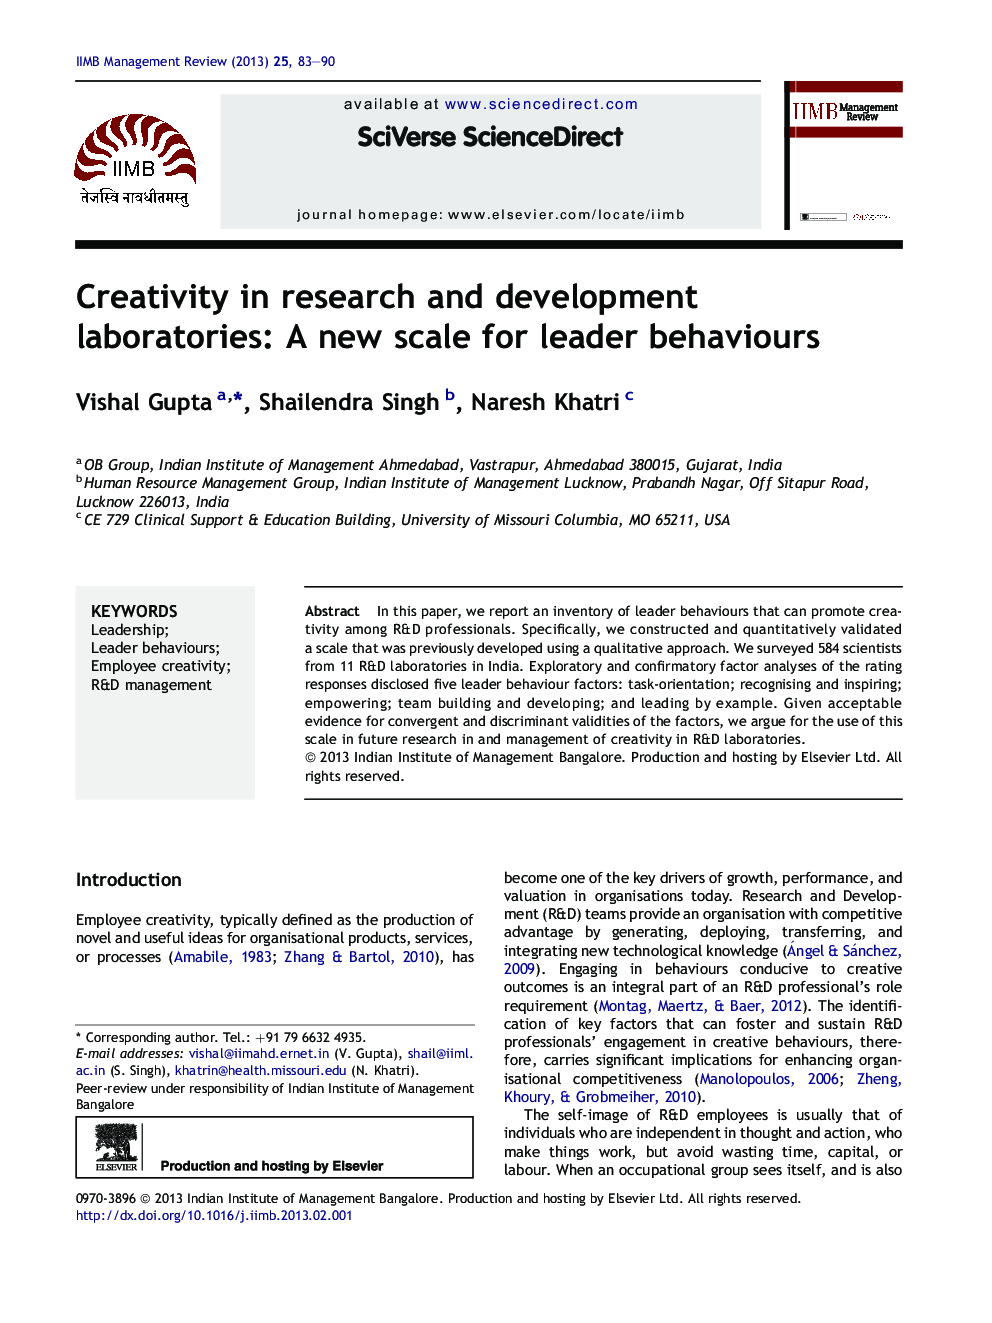 Creativity in research and development laboratories: A new scale for leader behaviours 